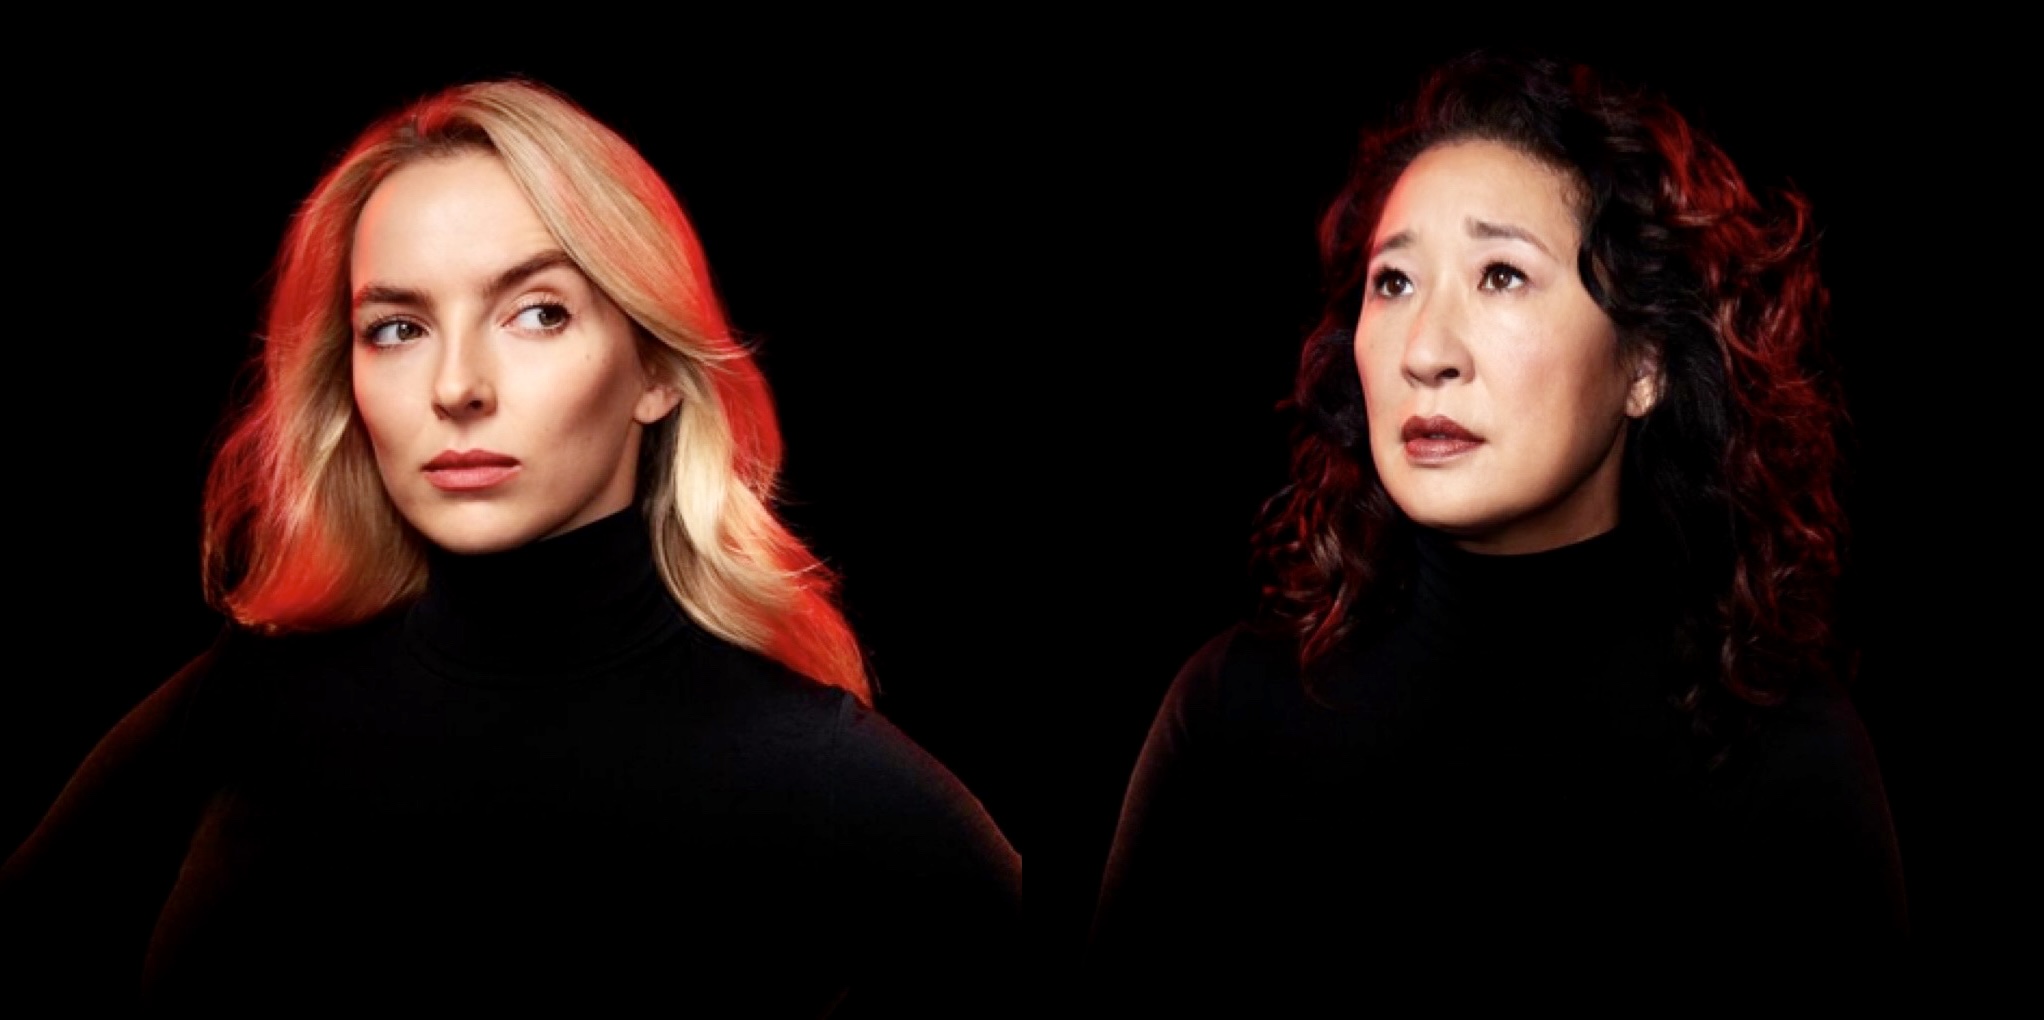 Killing Eve canada Sandra Oh and Jodie Comer West Side Story top streaming charts